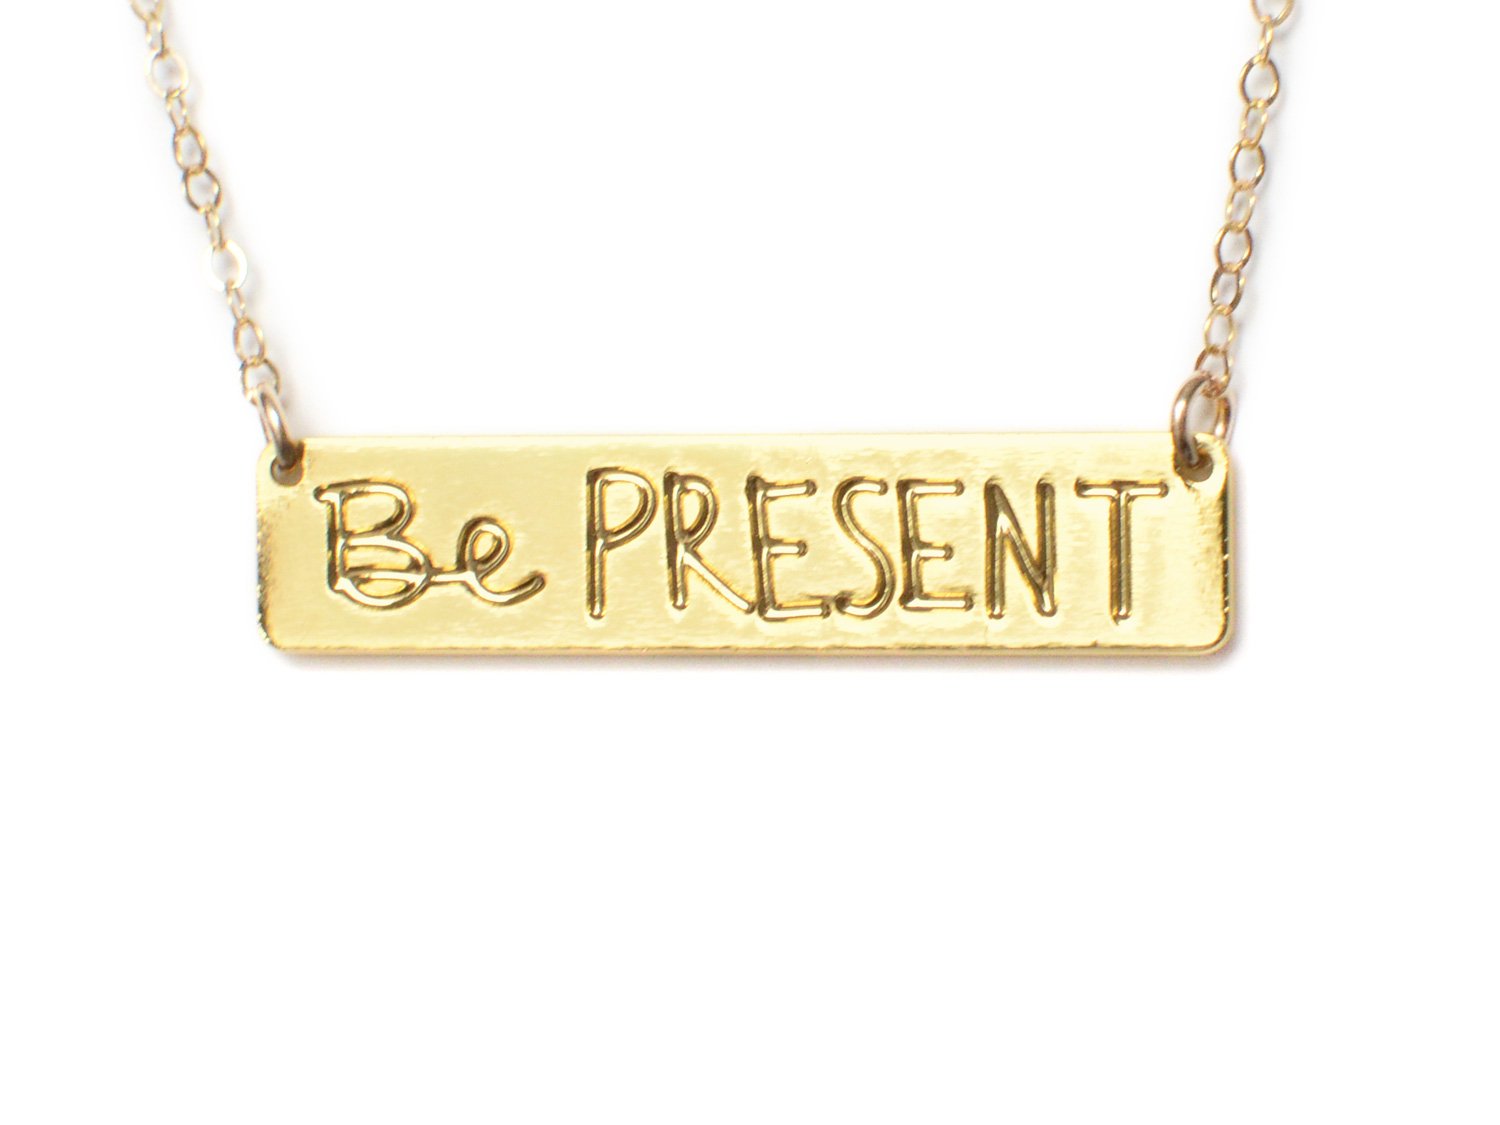 Be Present Bar Necklace - High Quality, Affordable, Hand Written, Empowering, Self Love, Mantra Word Necklace - Available in Gold and Silver - Made in USA - Brevity Jewelry